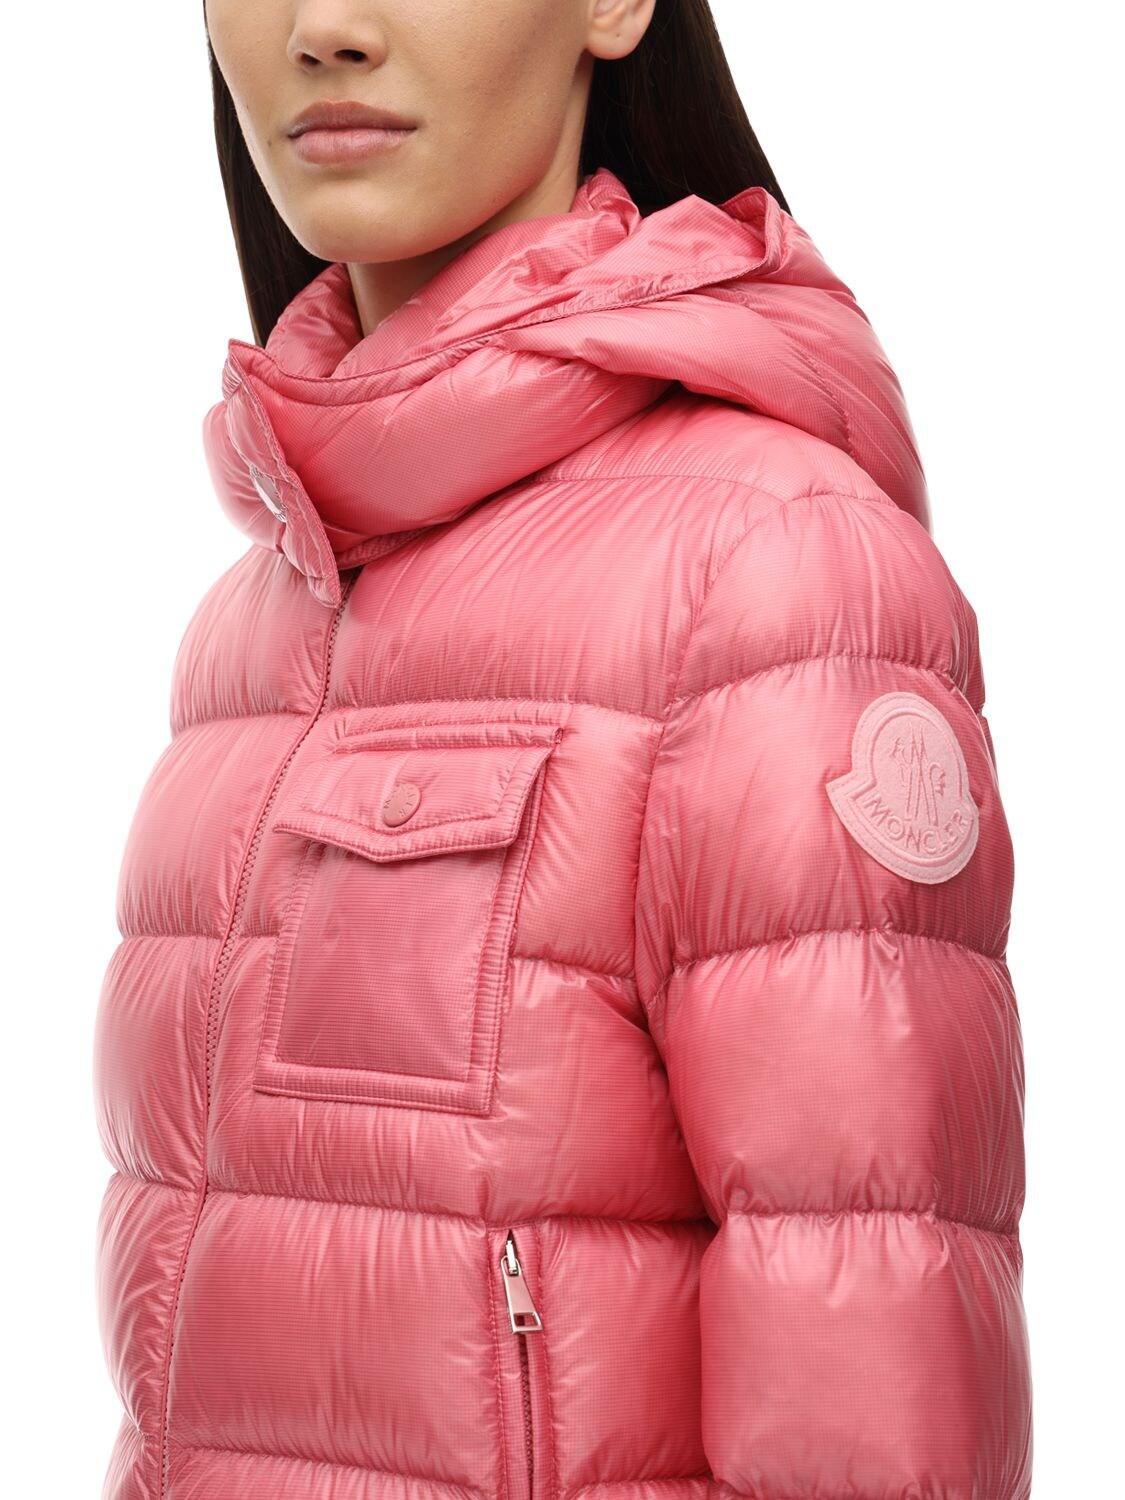 Moncler Turquin Padded Jacket in Pink - Lyst